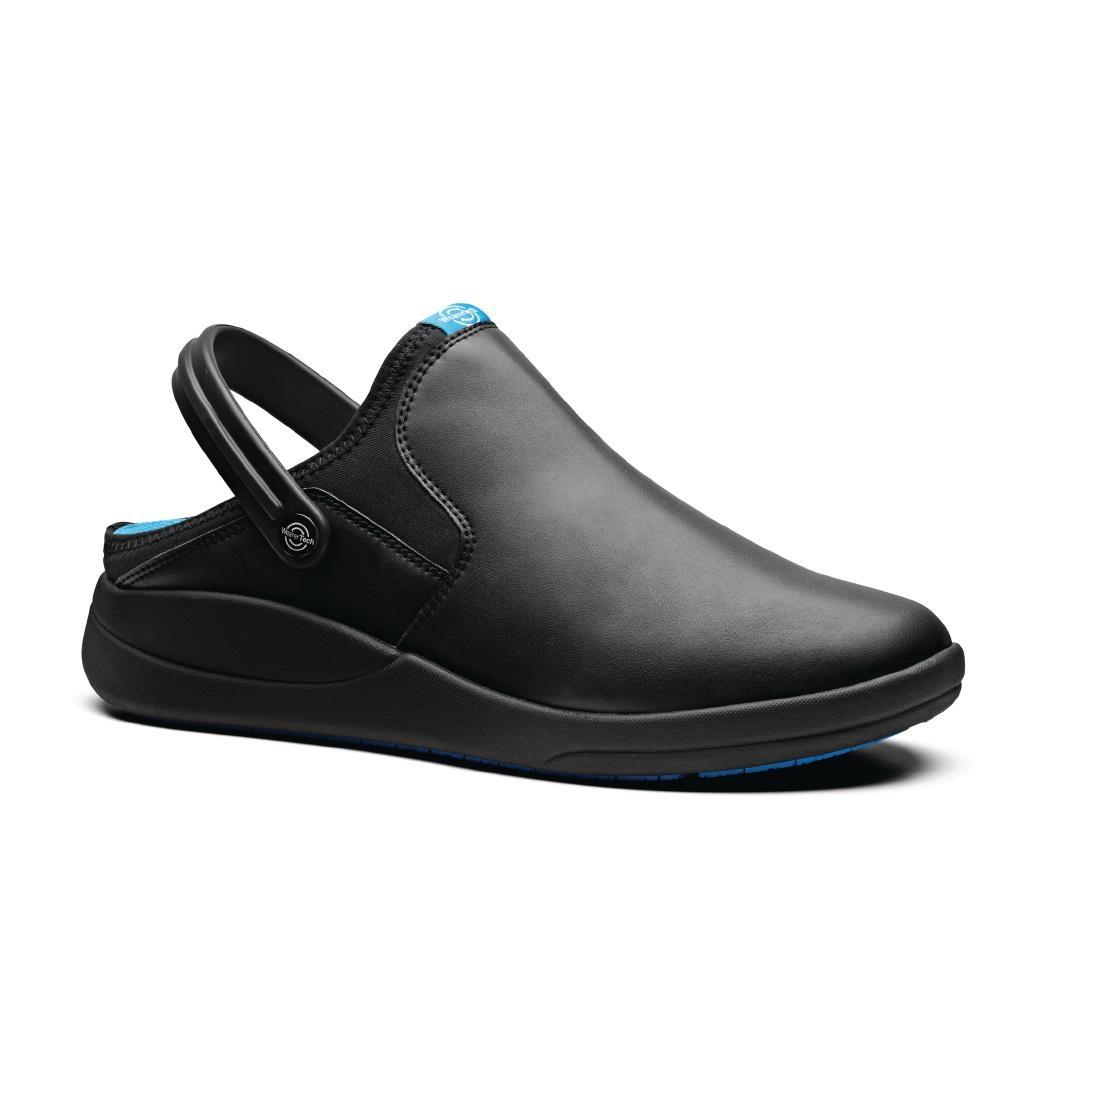 WearerTech Refresh Clog Black with Firm Insoles Size 43 - BB556-9  - 2